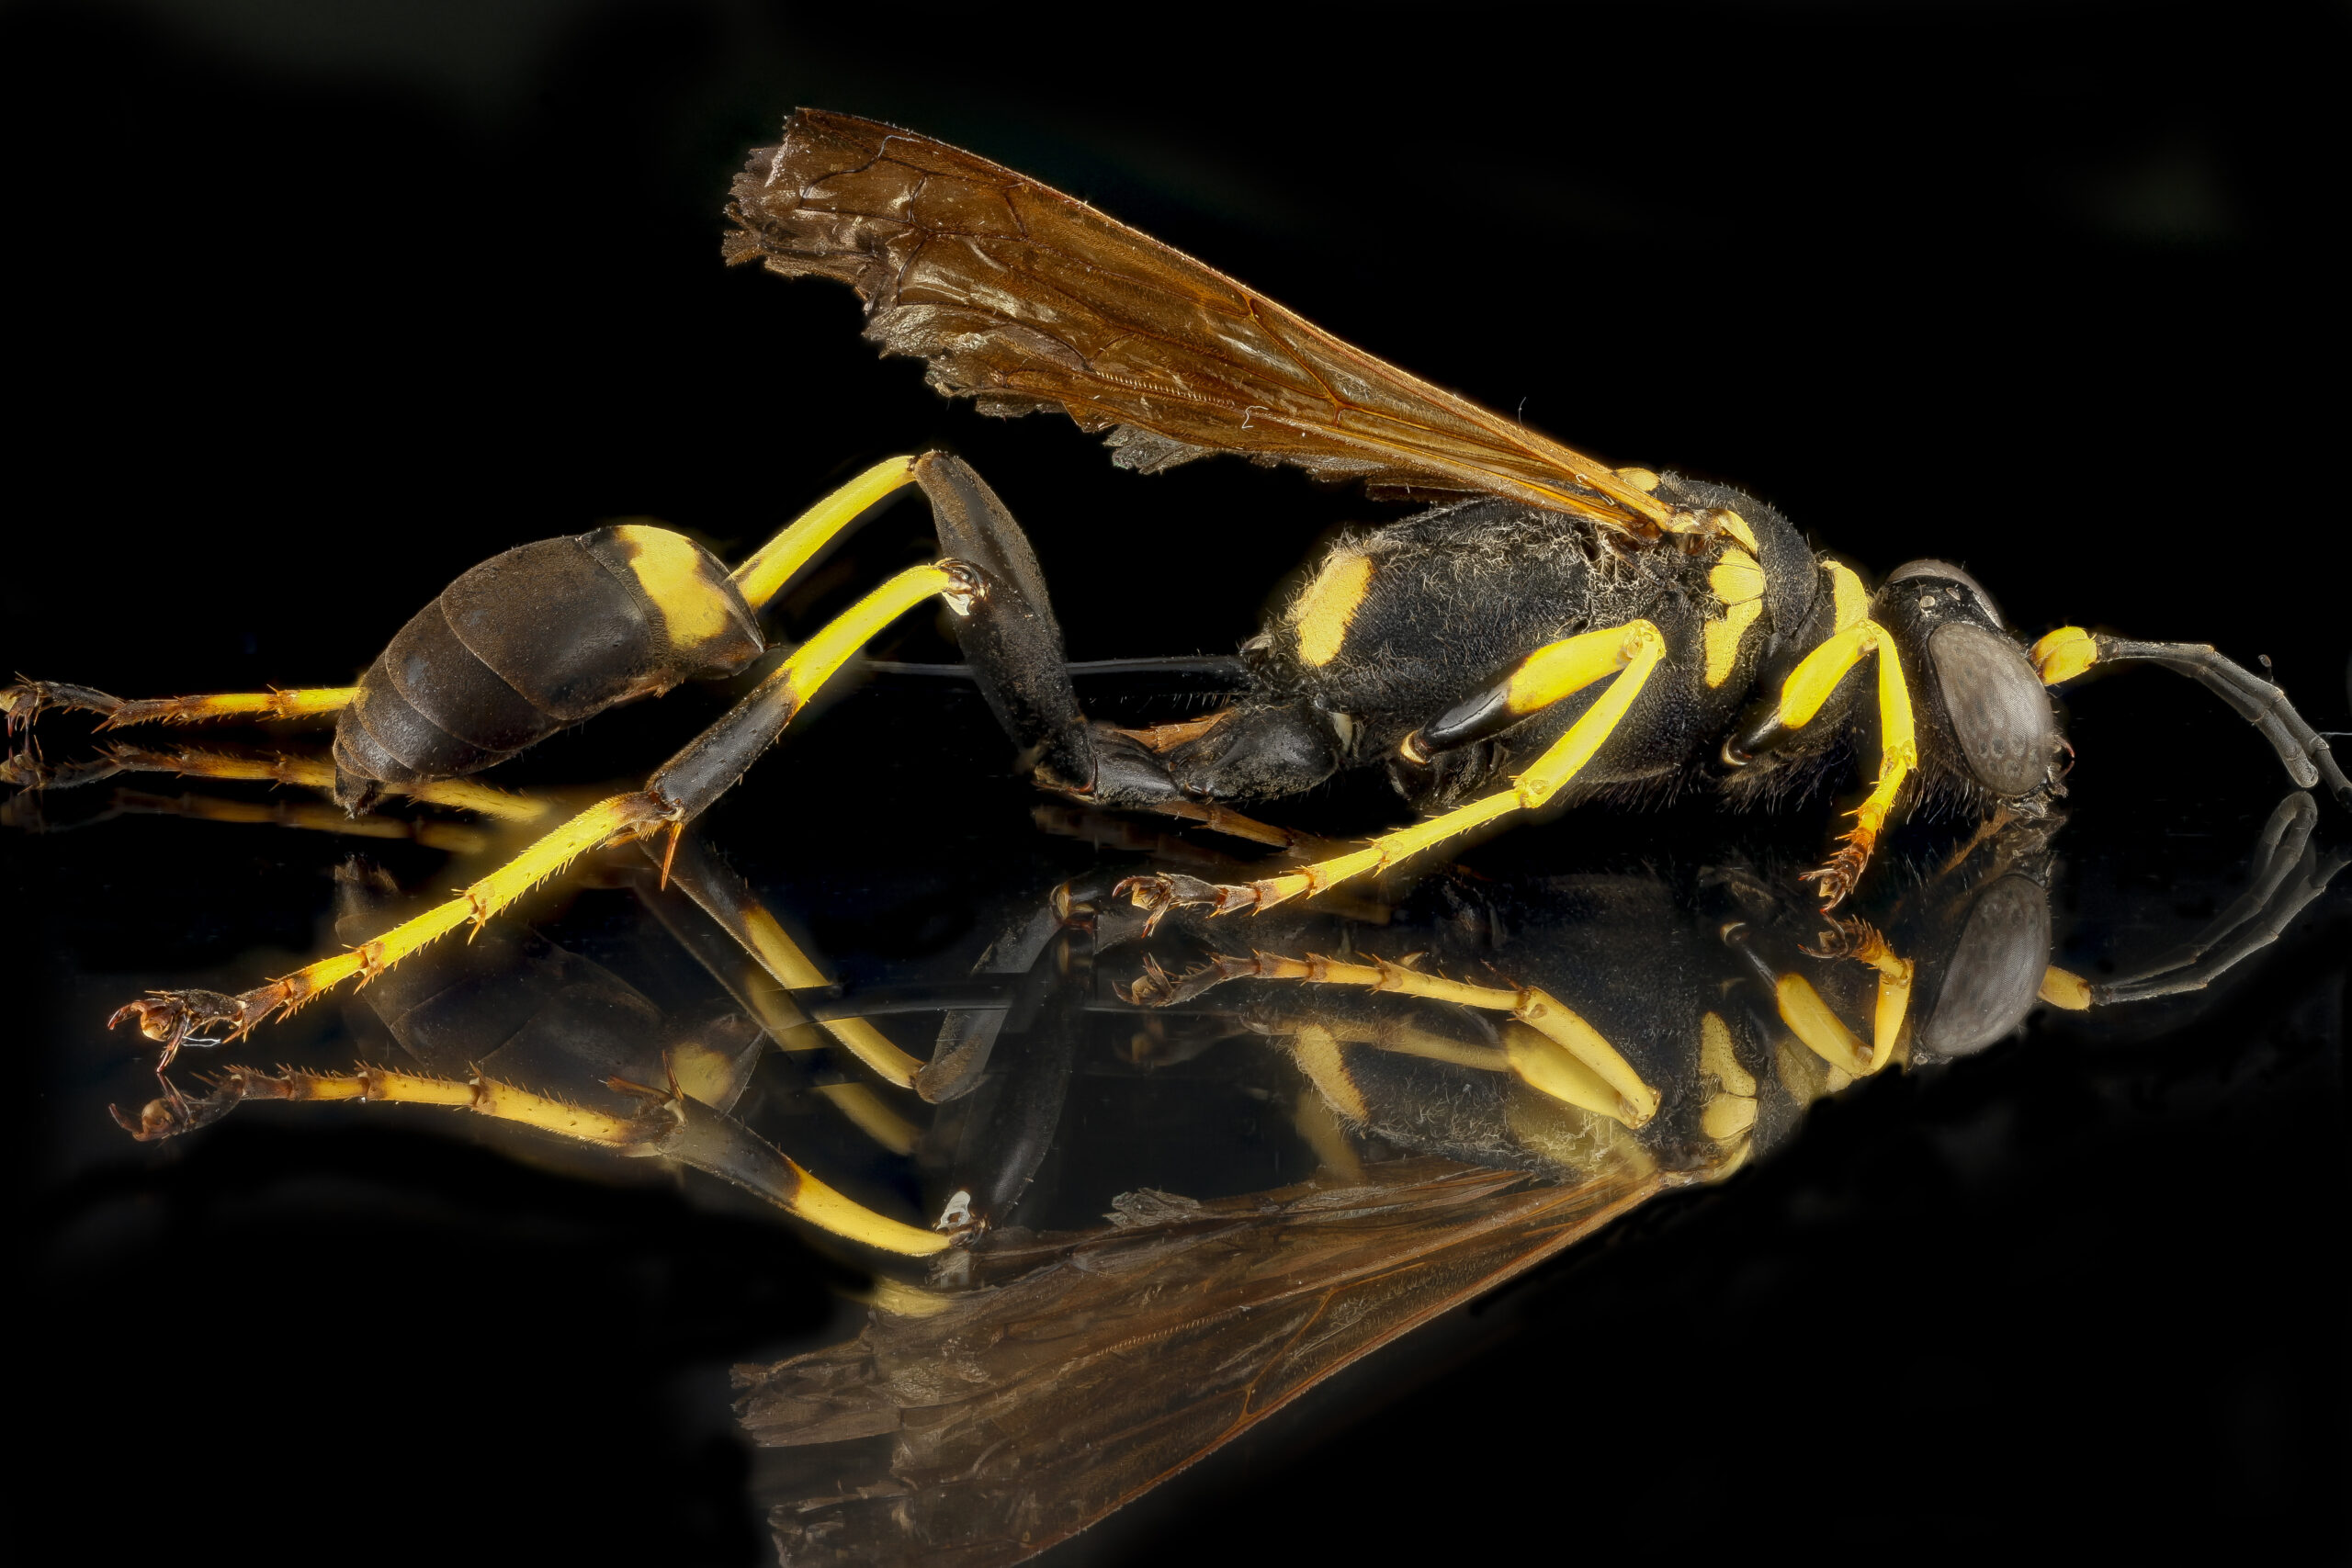 A pinned and posed yellow and black wasp with amber colored wings and a long, threadlike waist sits against a black, reflective background.